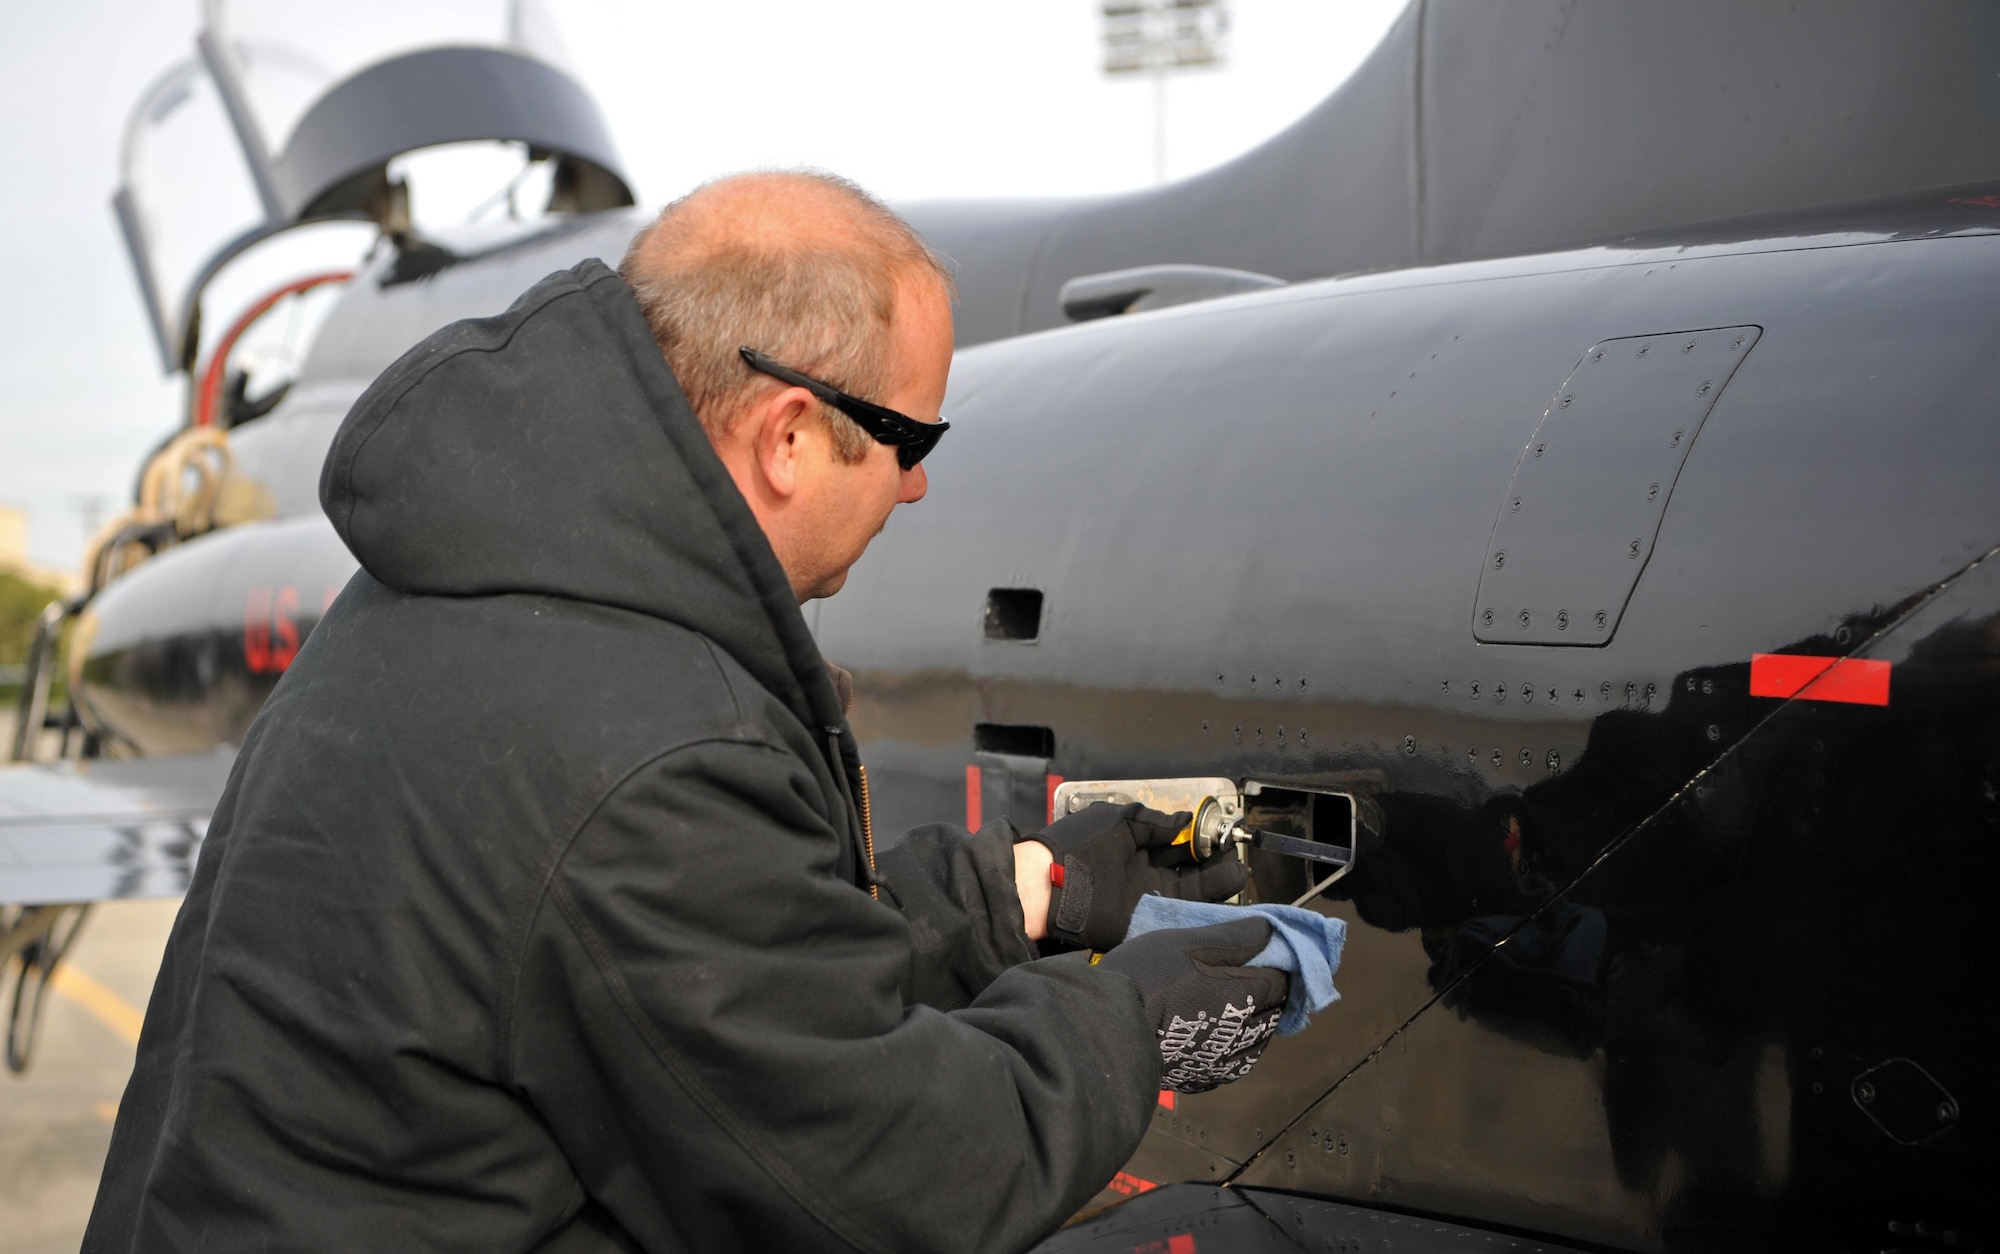 Matt Miller, 9th Maintenance Group T-38 aircraft mechanic, checks the oil in a T-38 Talon engine during a post-flight inspection Dec. 5, 2016, at Beale Air Force Base, California. The mechanics take an oil sample from T-38 engines every 20 flight hours. (U.S. Air Force Photo/Airman Tristan D. Viglianco)